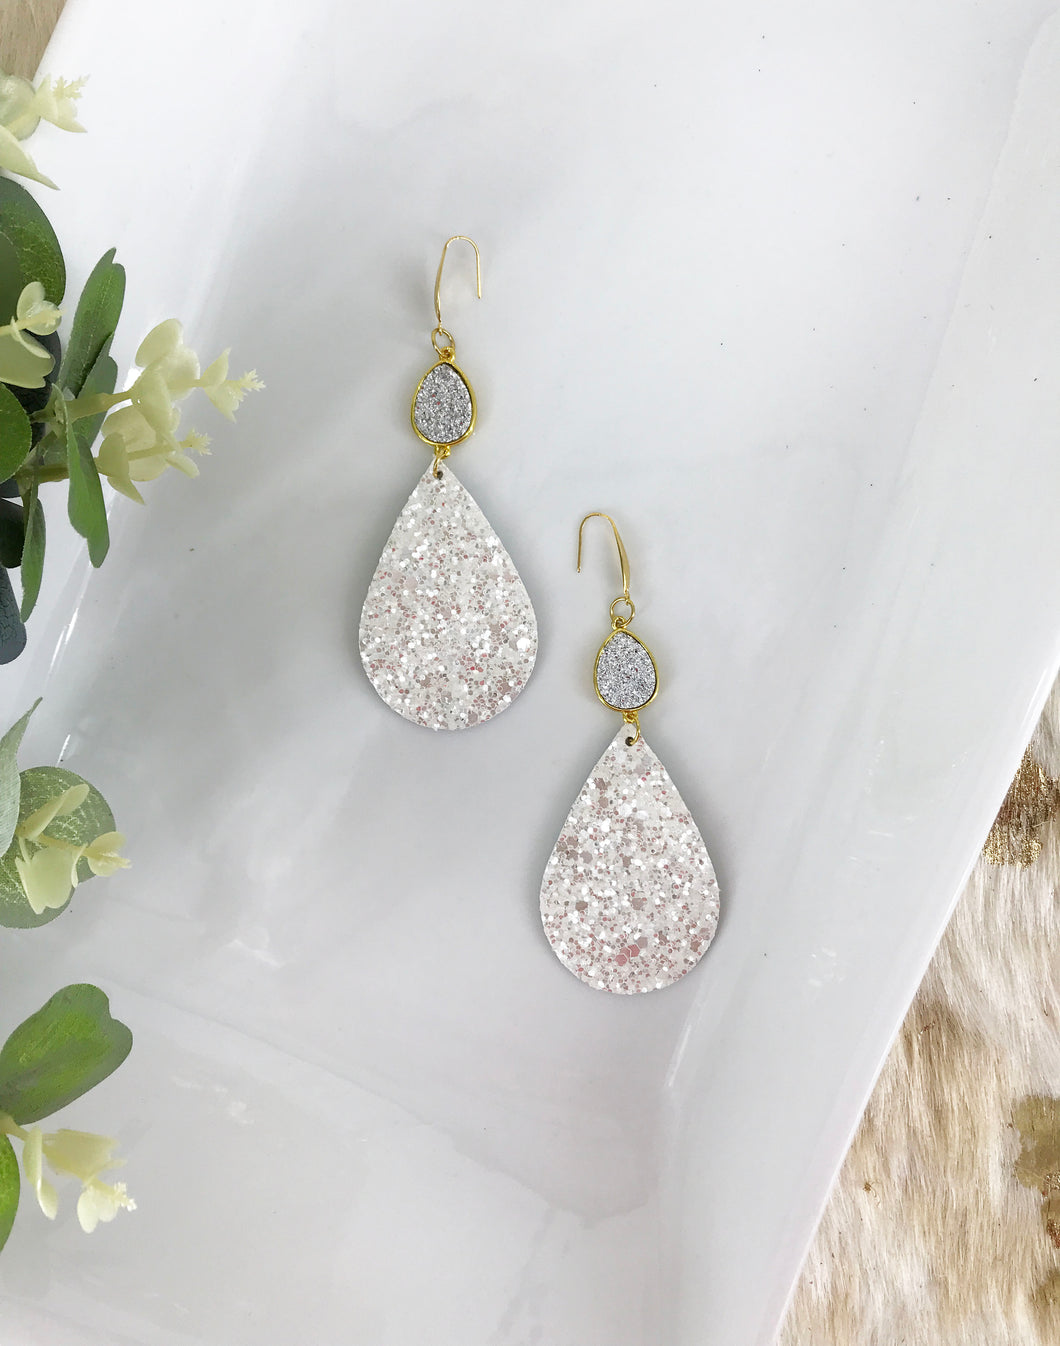 Druzy Agate and Pearly White Glitter on Leather Earrings - E19-2440